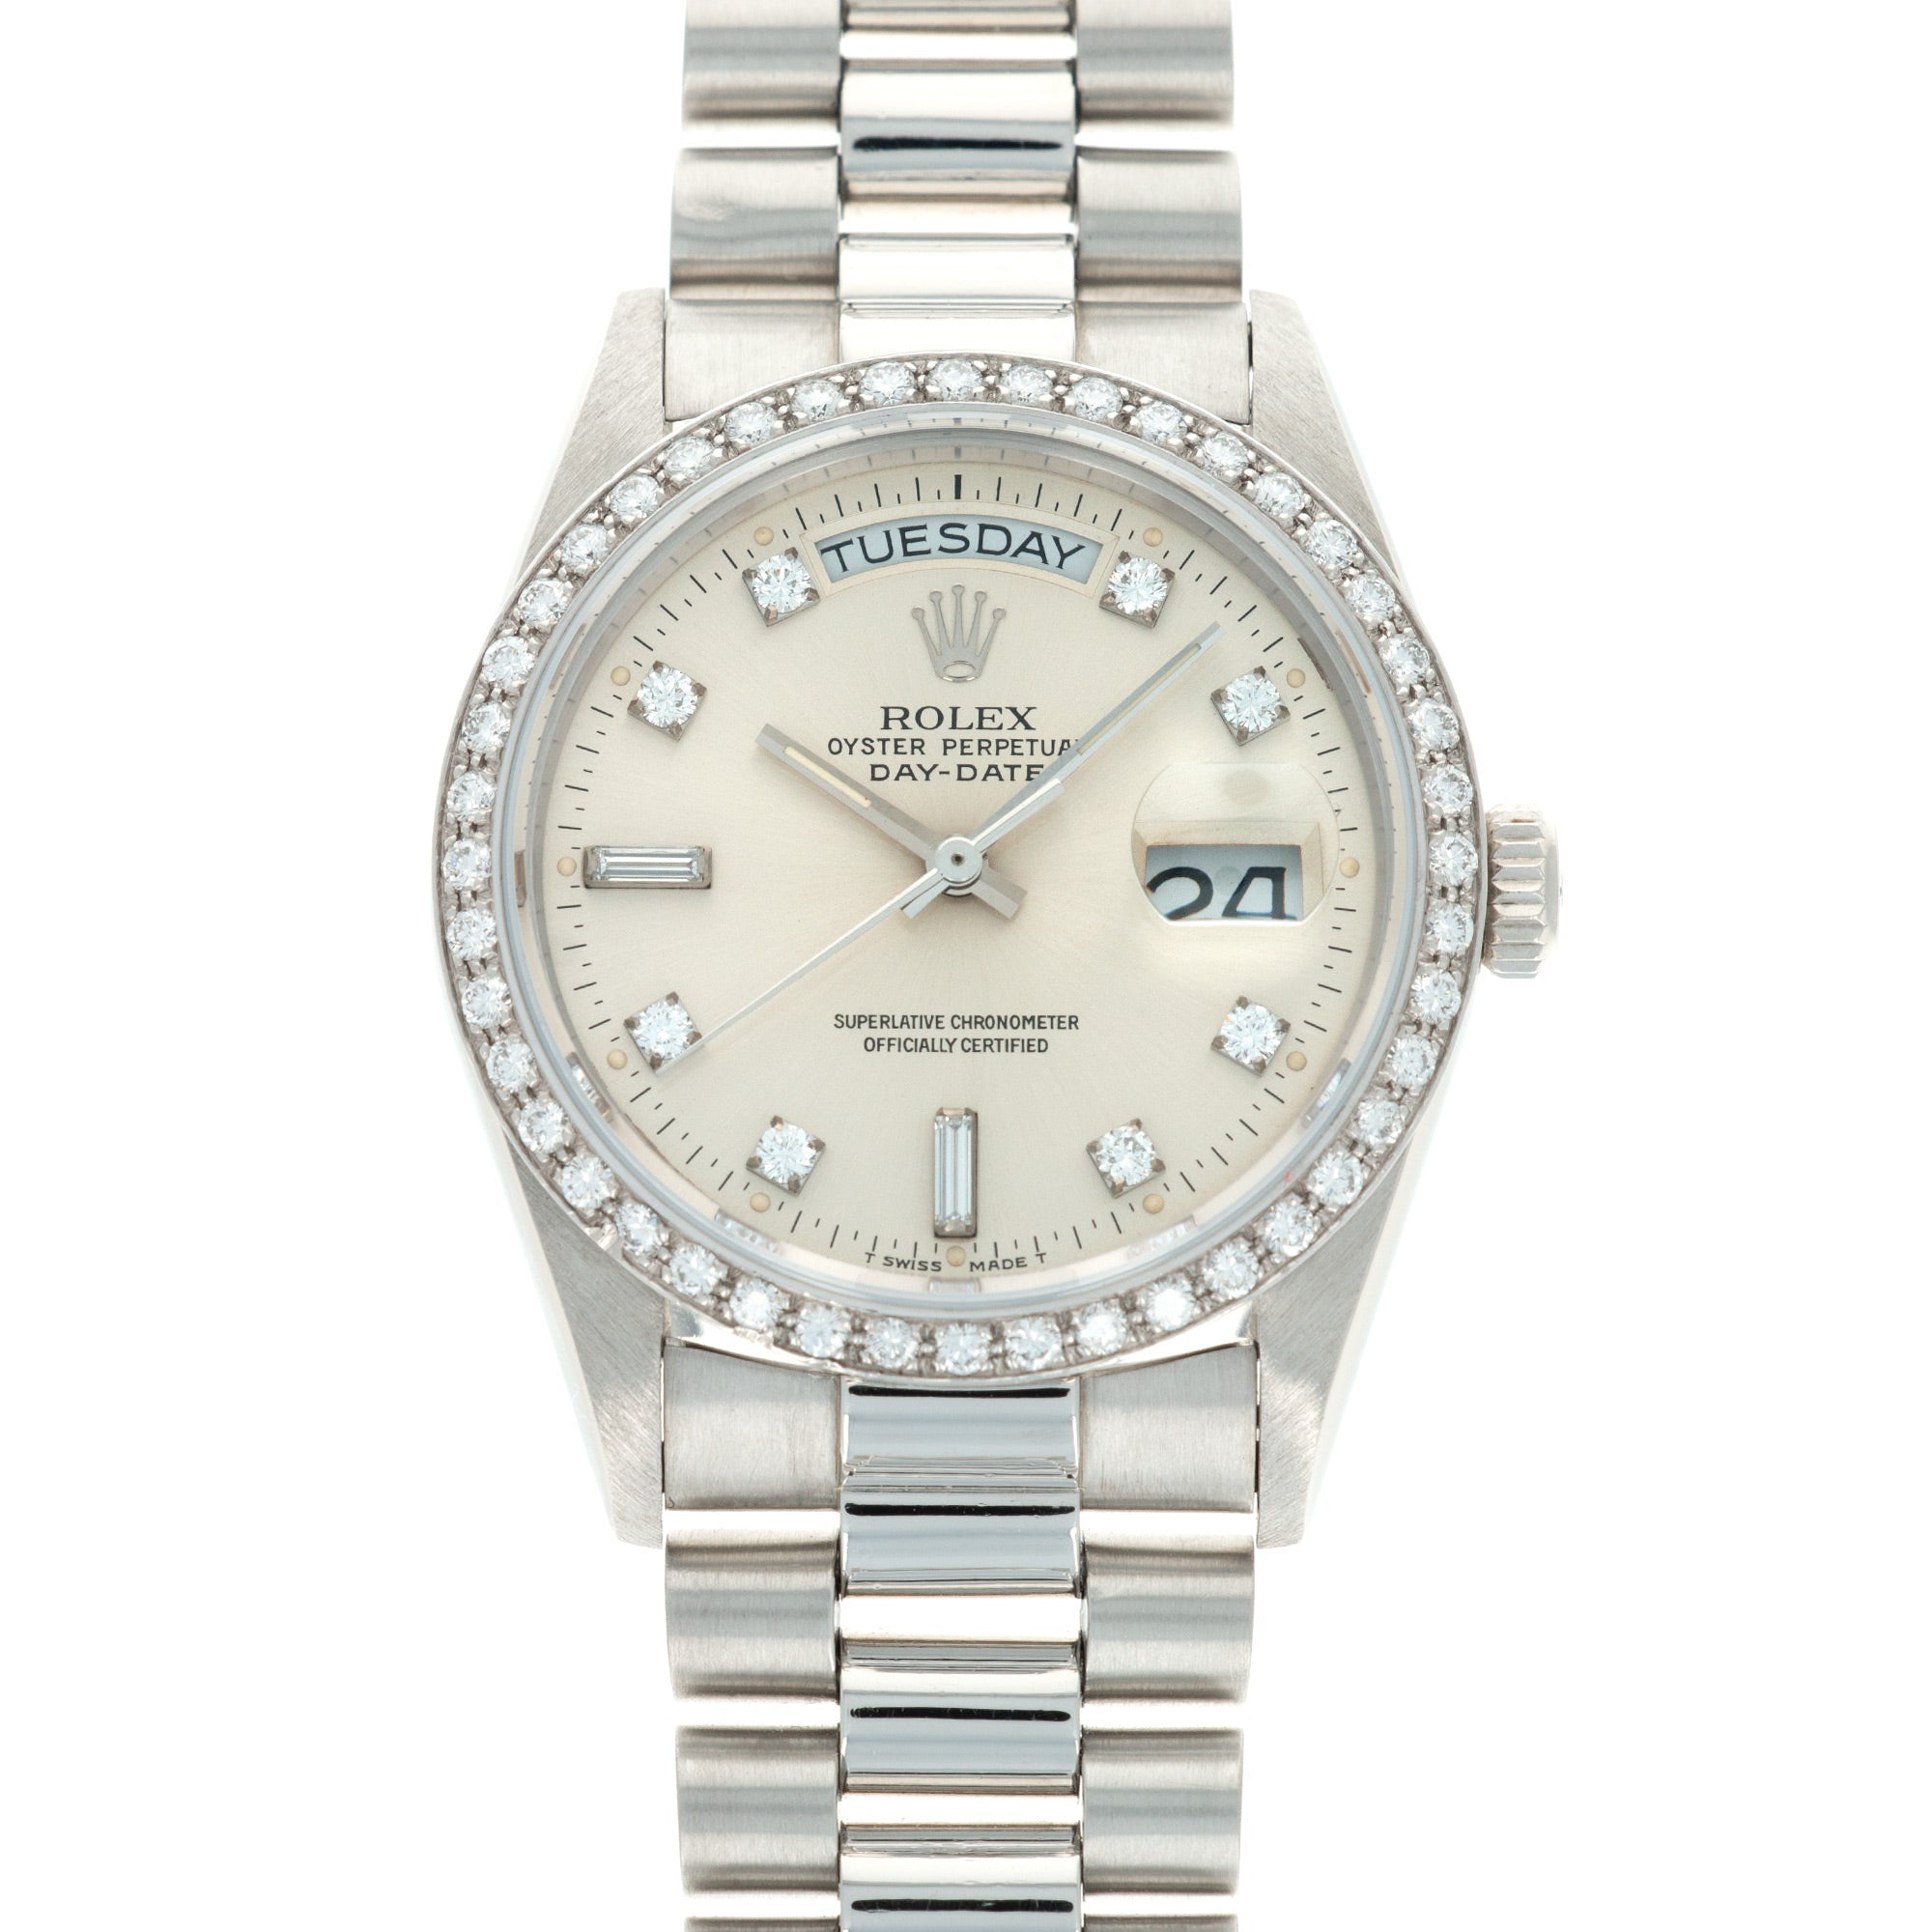 Rolex - Rolex Platinum Day-Date Ref 18046 with Diamond Bezel and Diamond Dial - The Keystone Watches